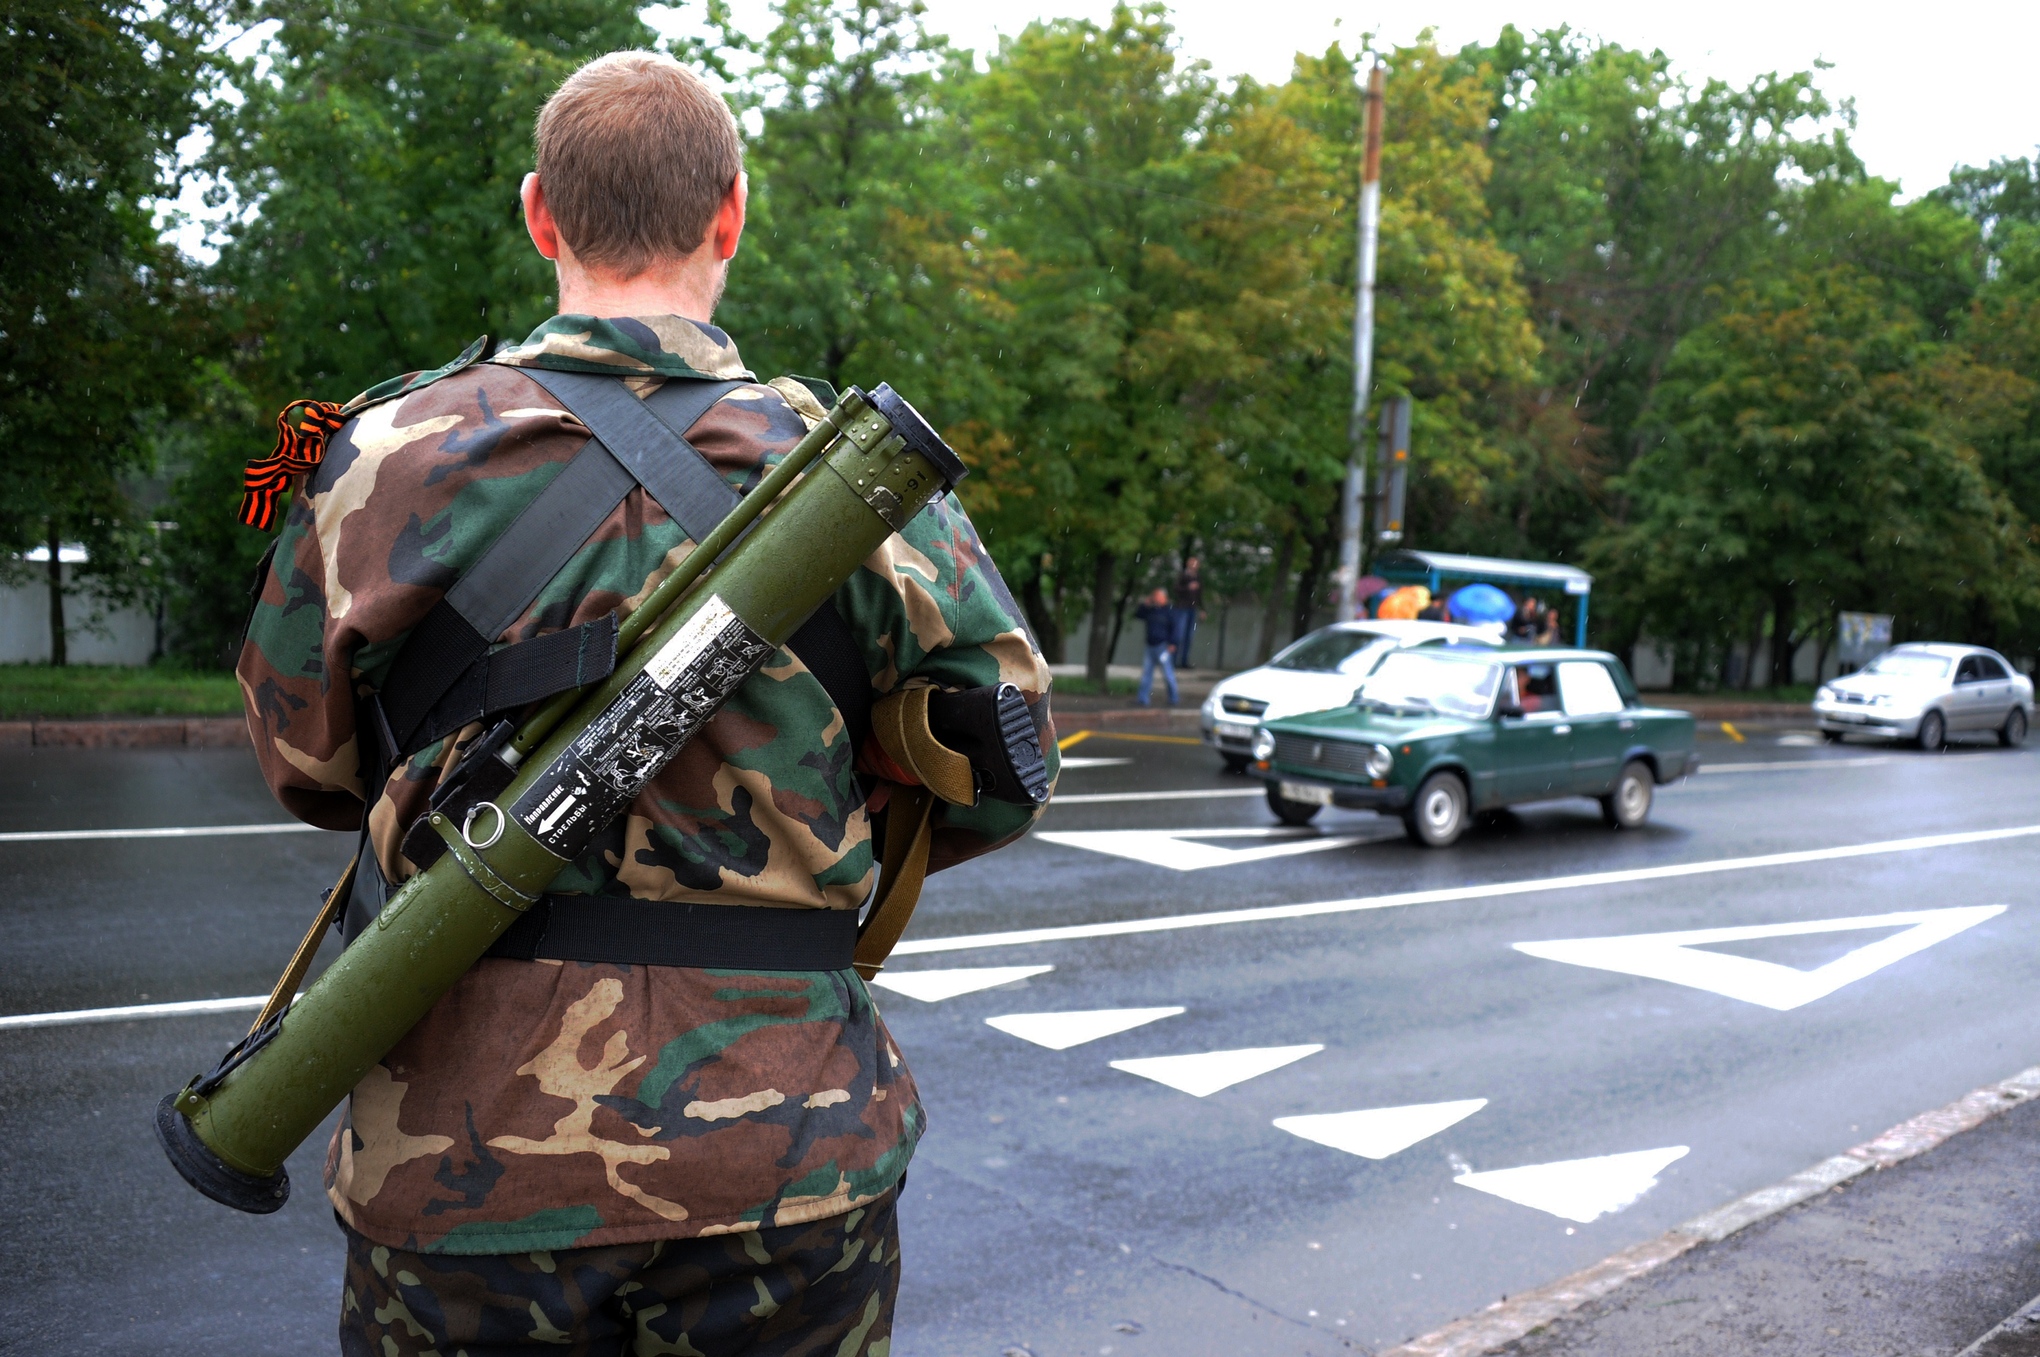 DPR Prepares for Full-Scale War with Pro-Kiev Forces